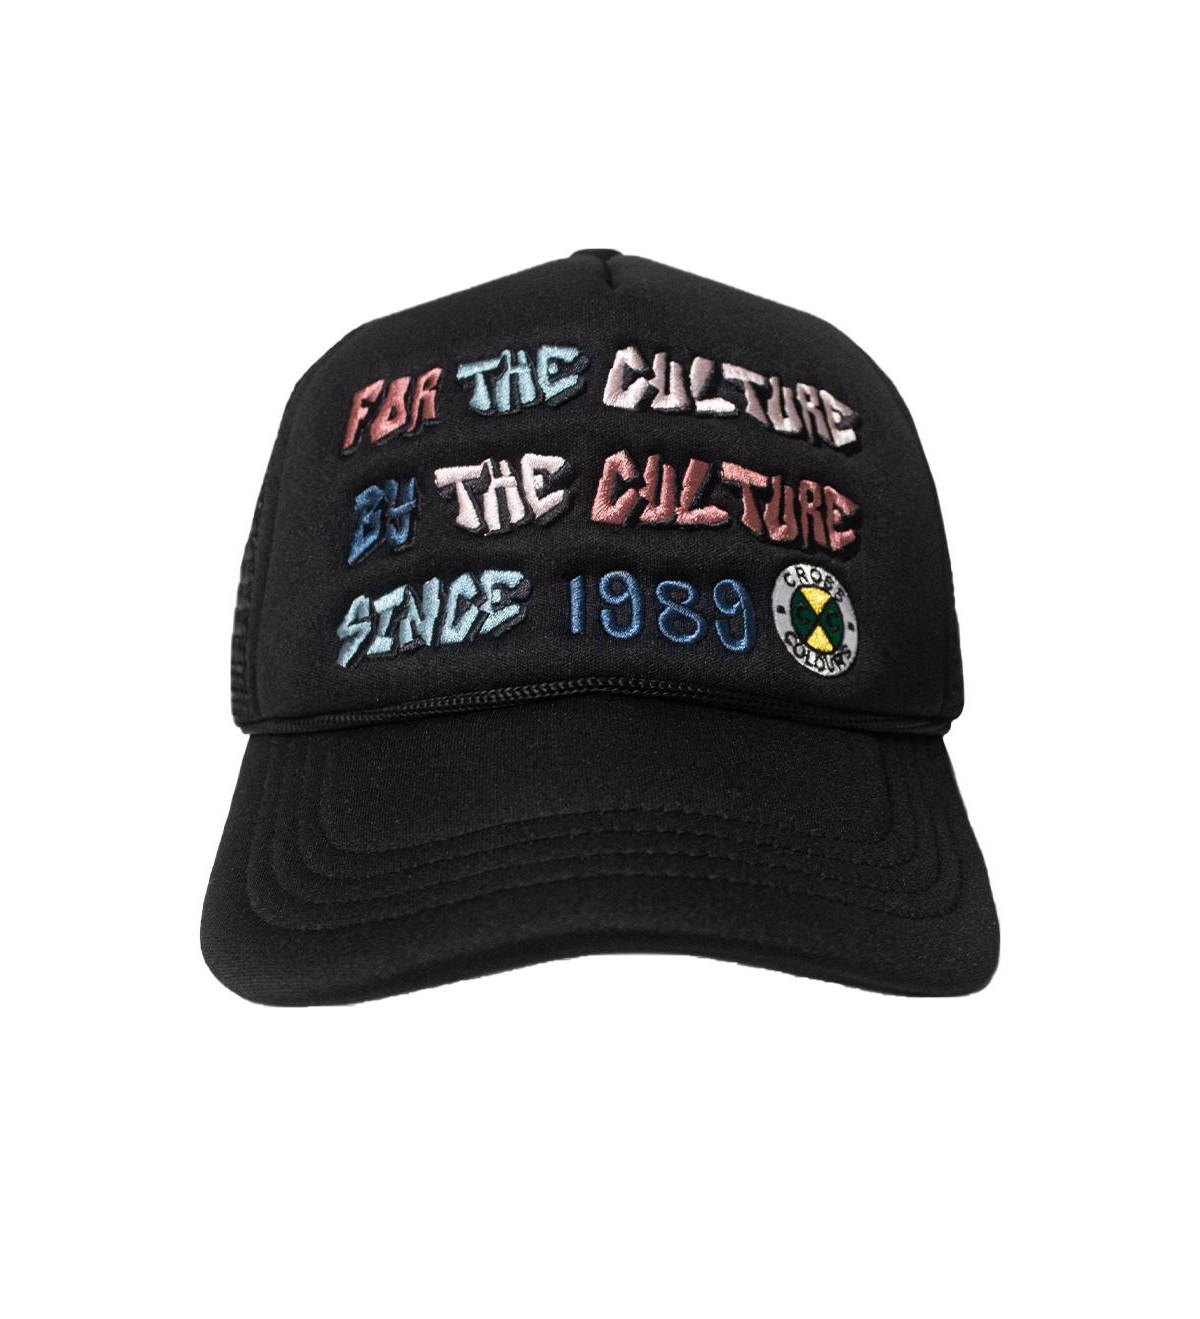 For The Culture Trucker Hat - Black